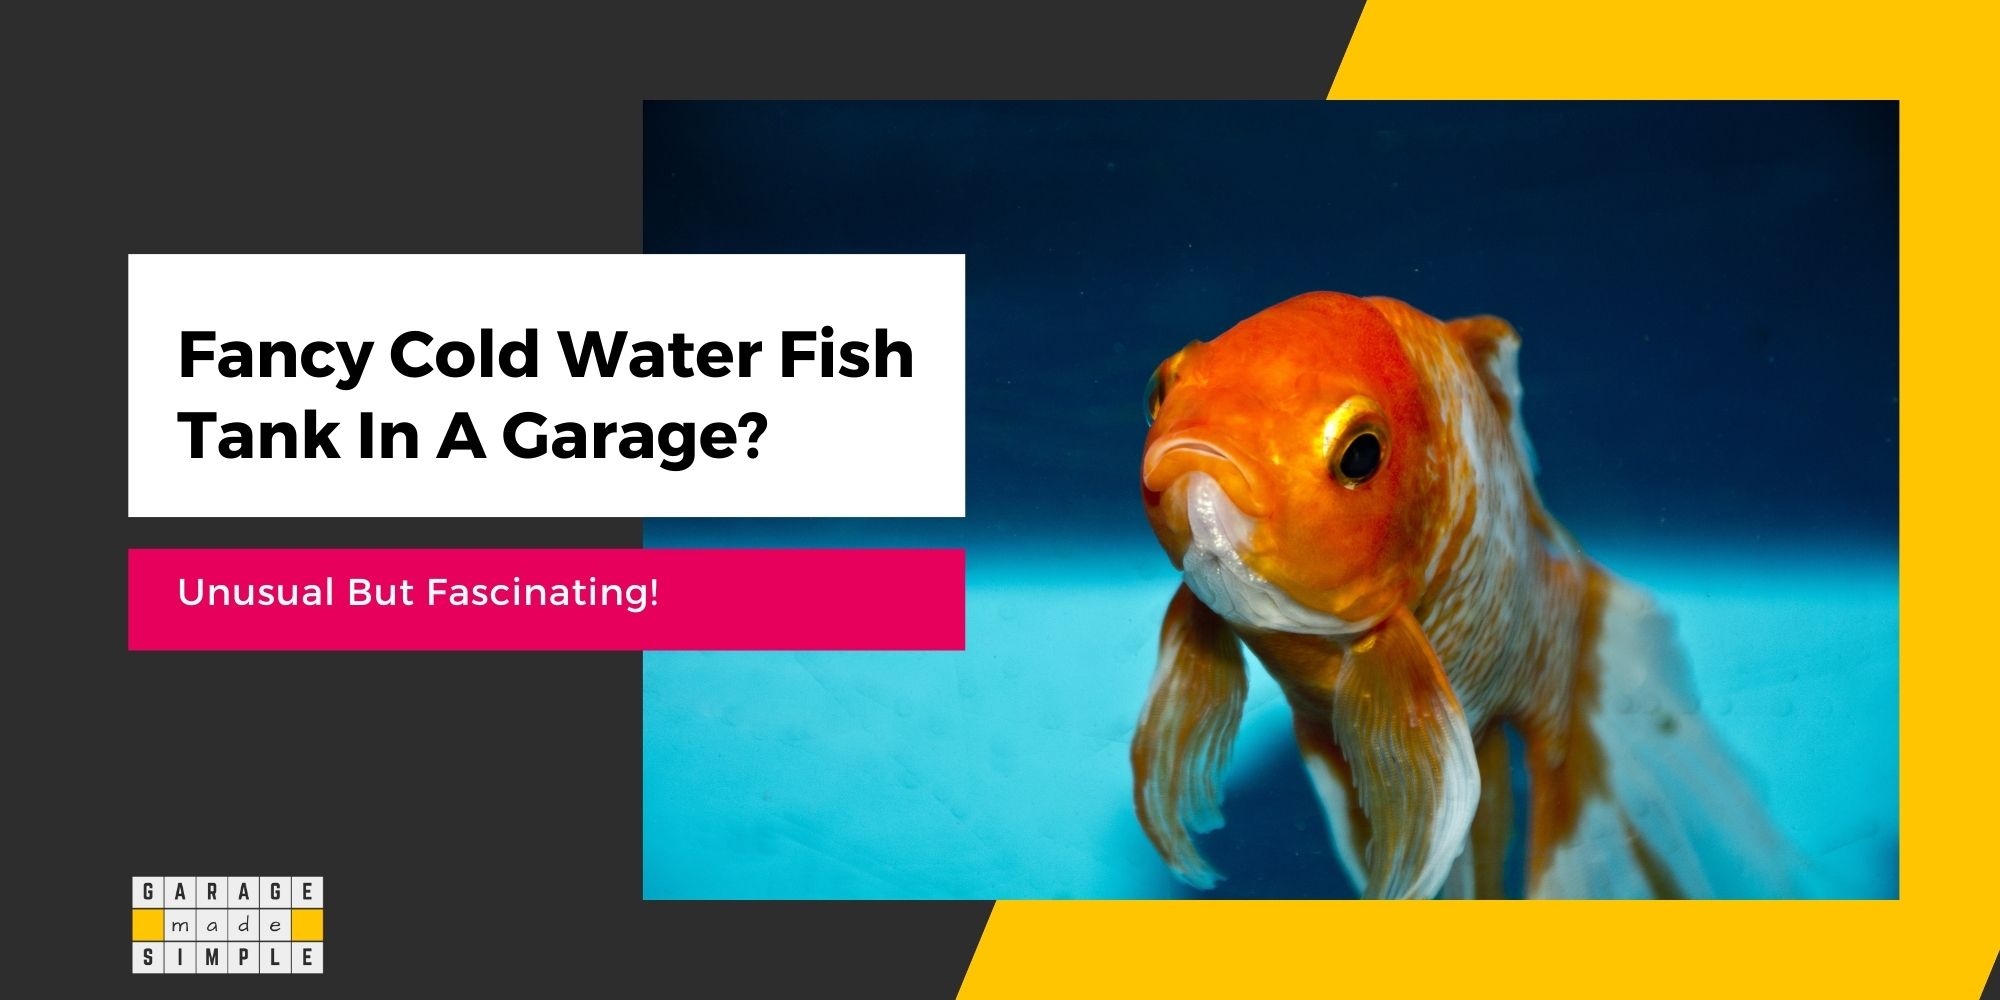 Fancy Cold Water Fish Tank In A Garage? (Unusual But Fascinating!)